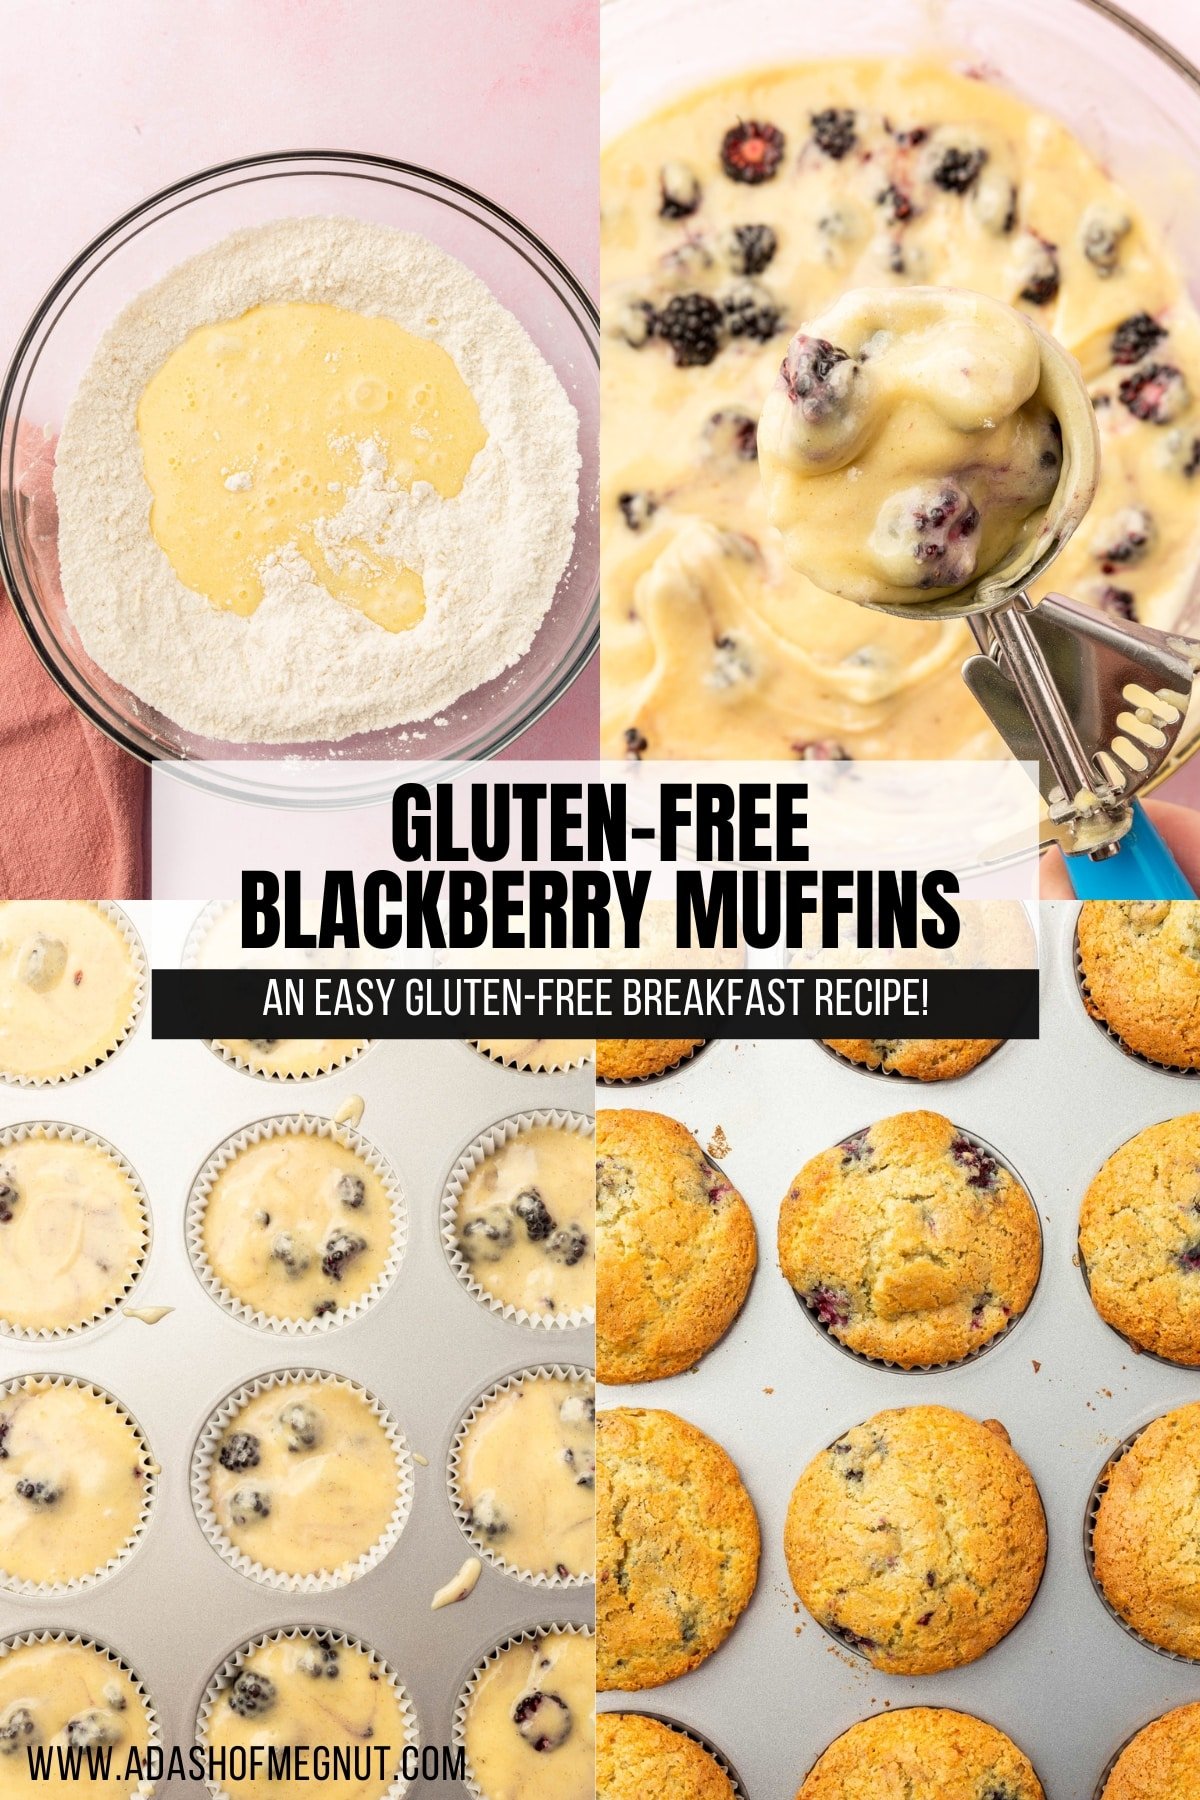 A four photo collage showing the process of making gluten free blackberry muffins. Photo 1: Wet ingredients are added to the dry ingredients in a glass mixing bowl. Photo 2: A ice cream scooper is filled with gluten-free blackberry muffin batter. Photo 3: A silver muffin tin is filled with blackberry muffin batter before baking. Photo 4: An overhead view of 12 blackberry muffins baked in a muffin tin.